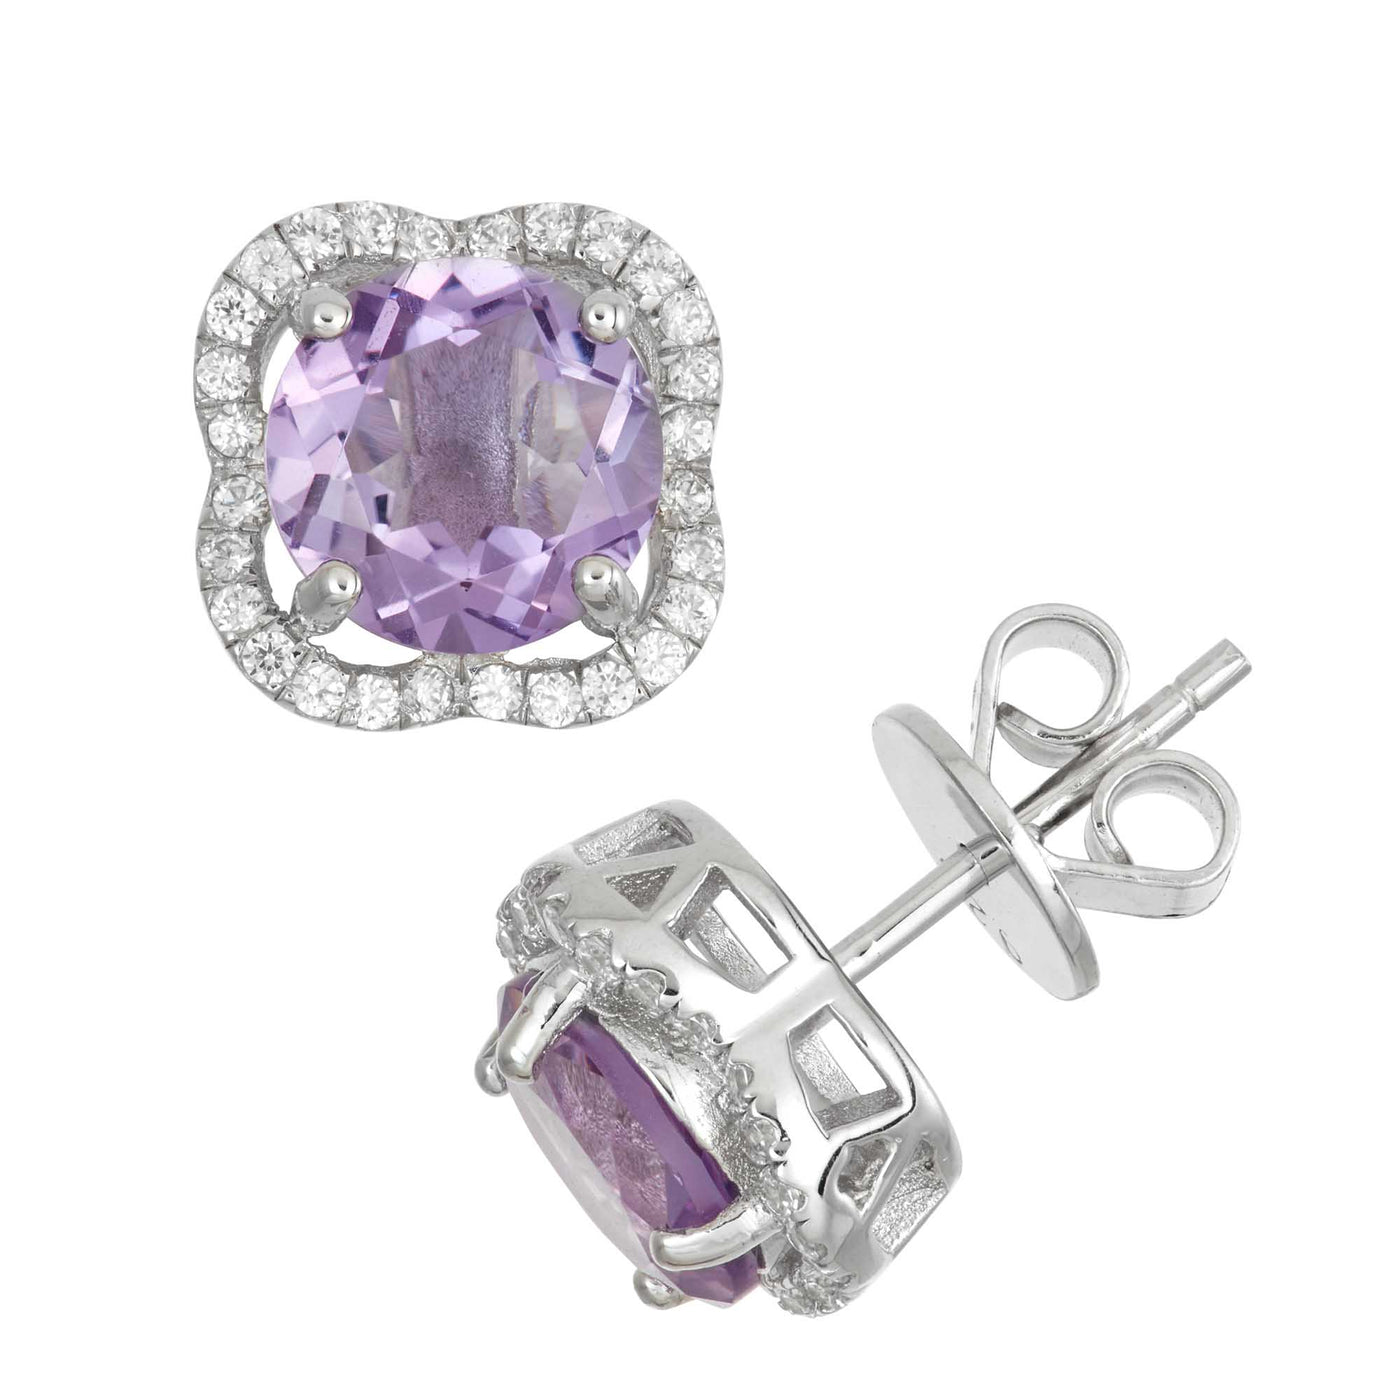 Rebecca Sloane Silver Clover Earring With Round Amethyst & CZ